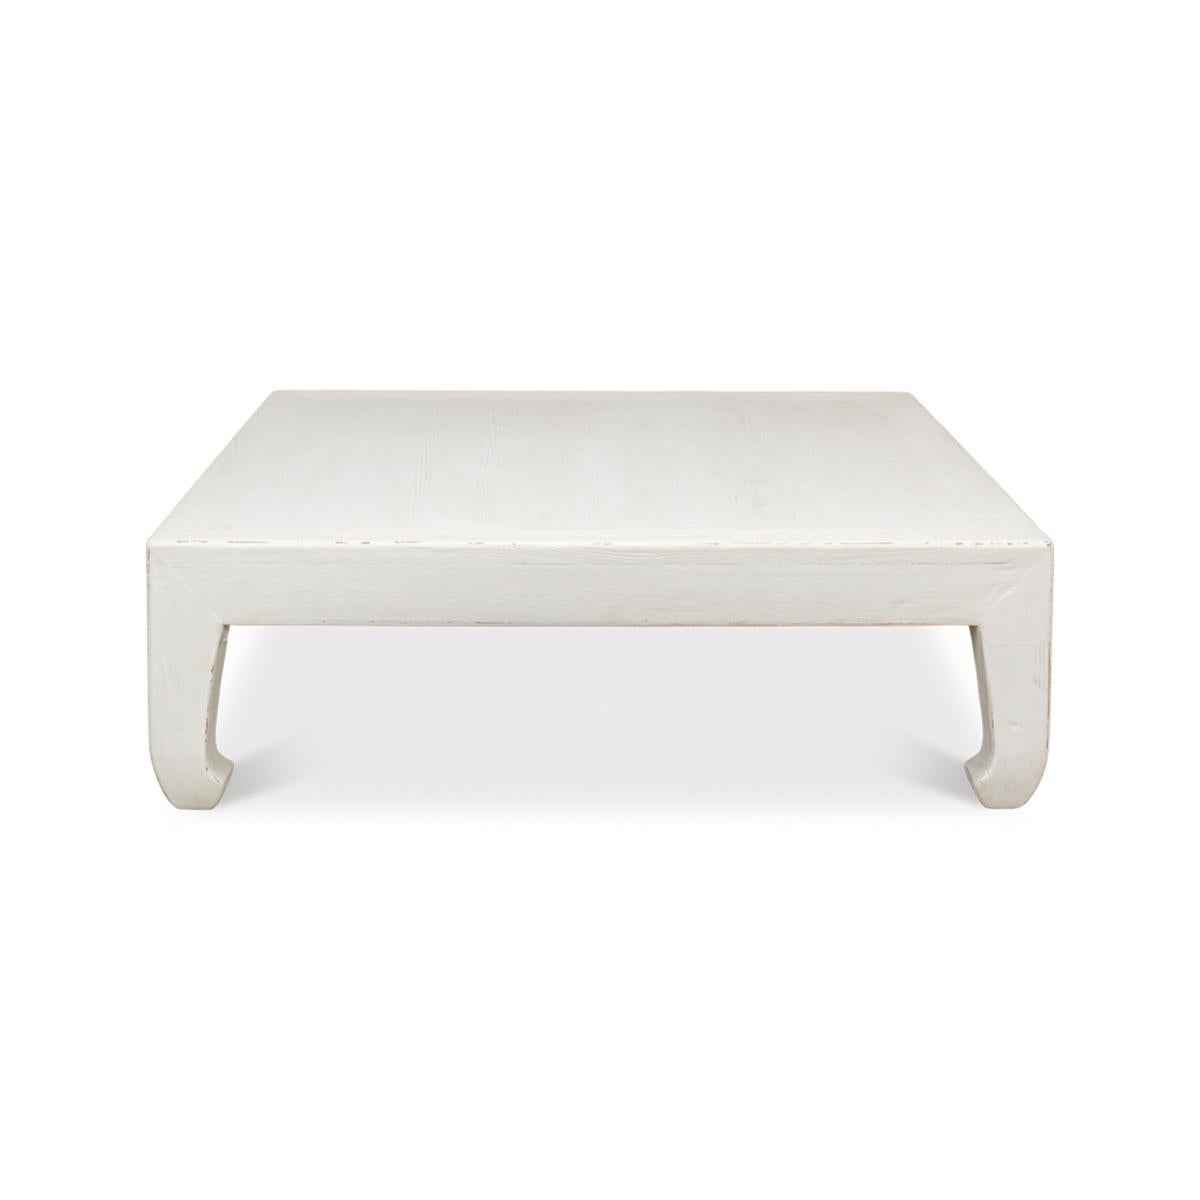 Modern Asian-style white coffee table, a Classic style inspired by the far east. This table is a large square shape with horse hoof-style legs, a design that dates back to the 14th century. 

Made of reclaimed pine with a slightly distressed white